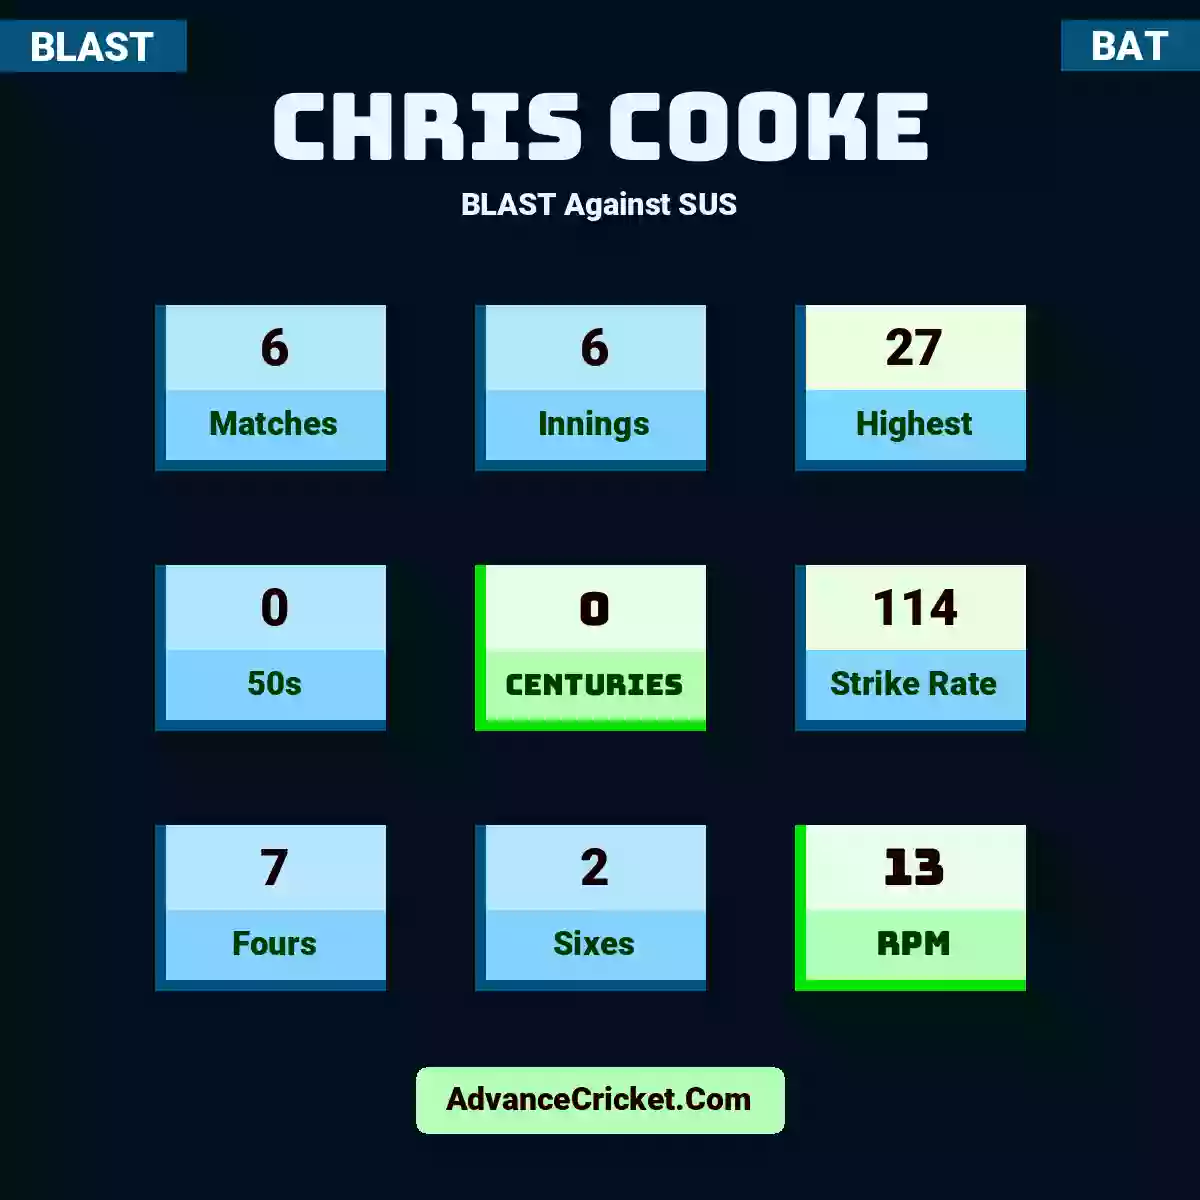 Chris Cooke BLAST  Against SUS, Chris Cooke played 6 matches, scored 27 runs as highest, 0 half-centuries, and 0 centuries, with a strike rate of 114. C.Cooke hit 7 fours and 2 sixes, with an RPM of 13.